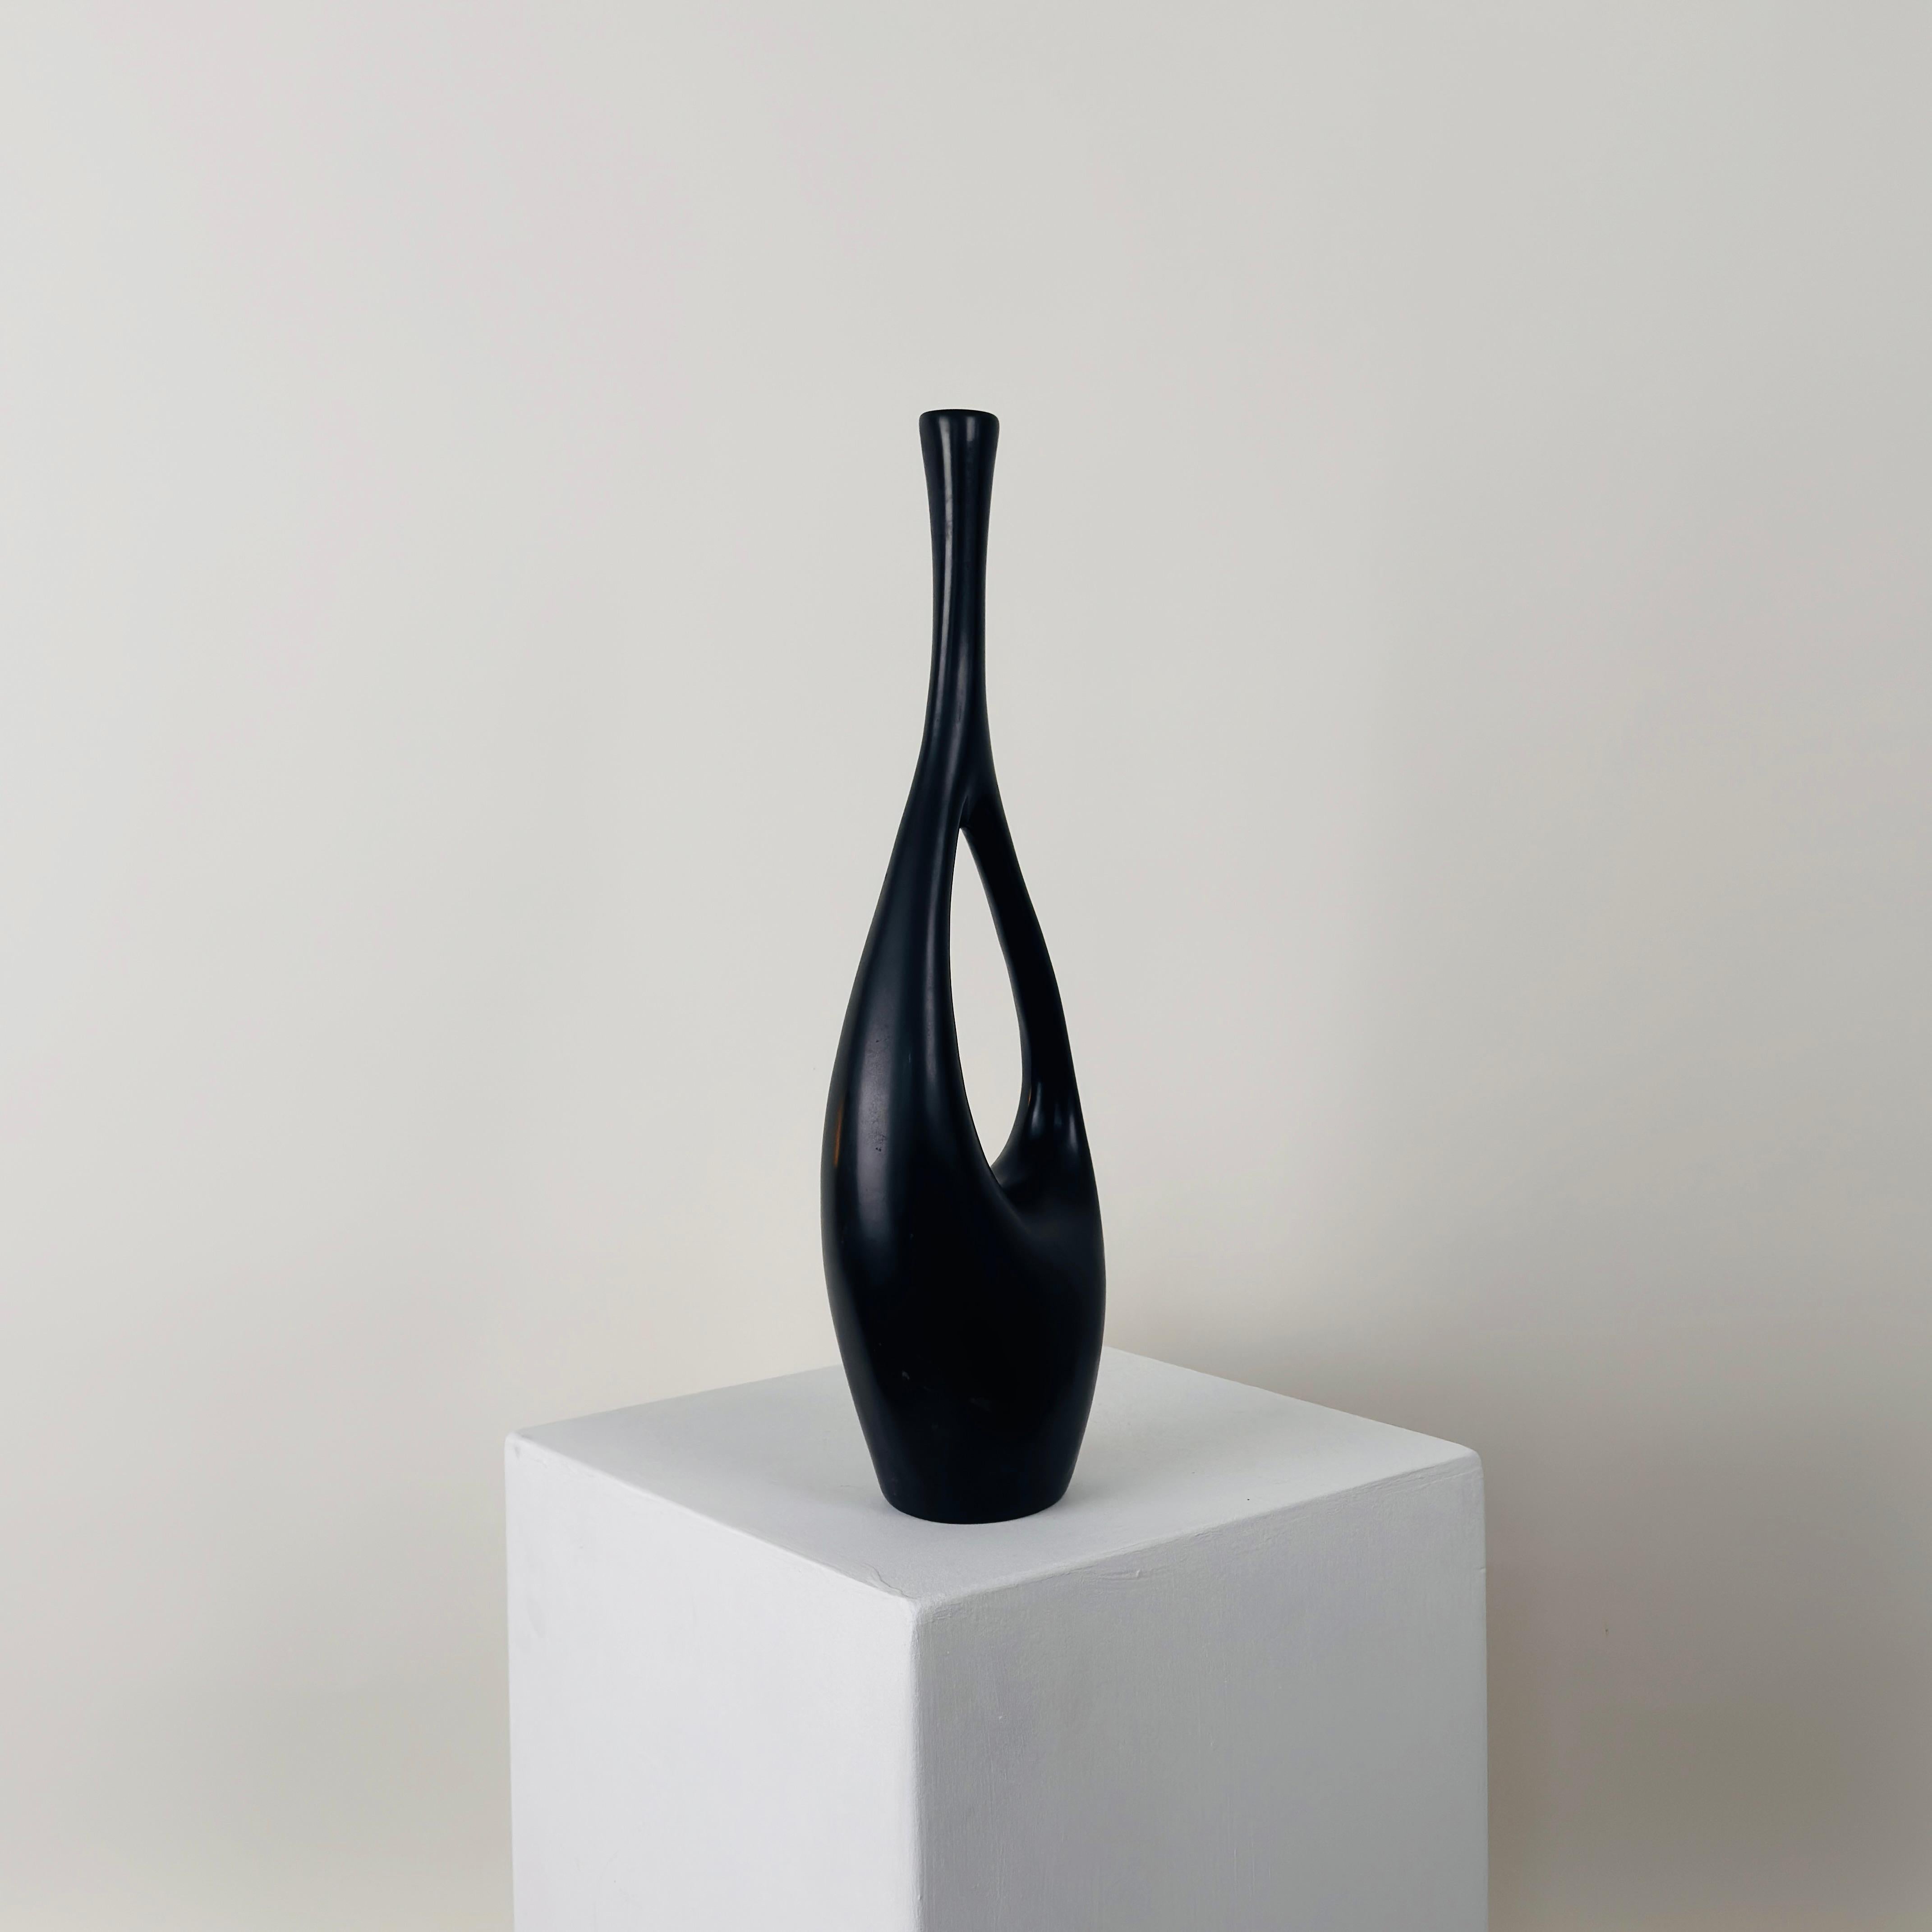 Glazed Large soliflore vase with black ceramic handle by Jean André Doucin, circa 1950.